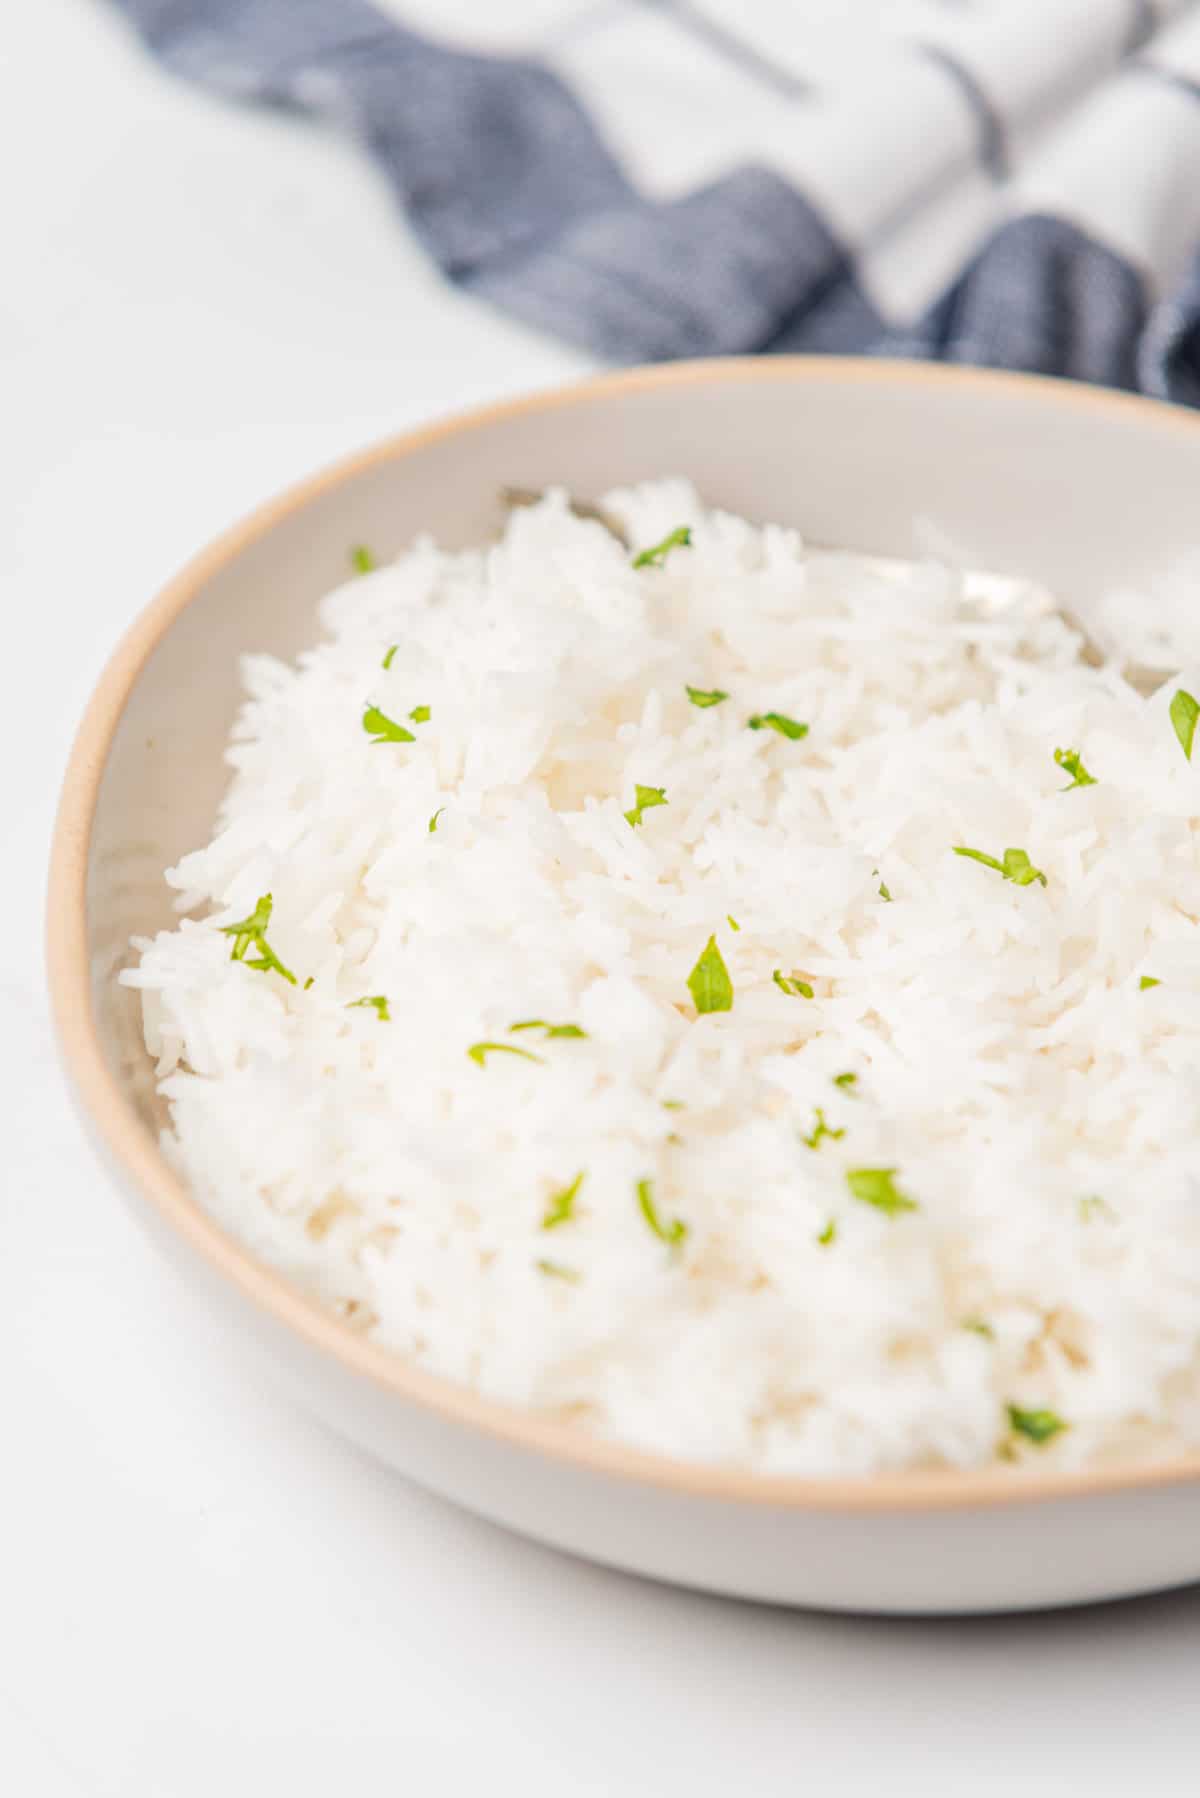 A closeup image of a bowl full of white rice with green herbs sprinkled on top.